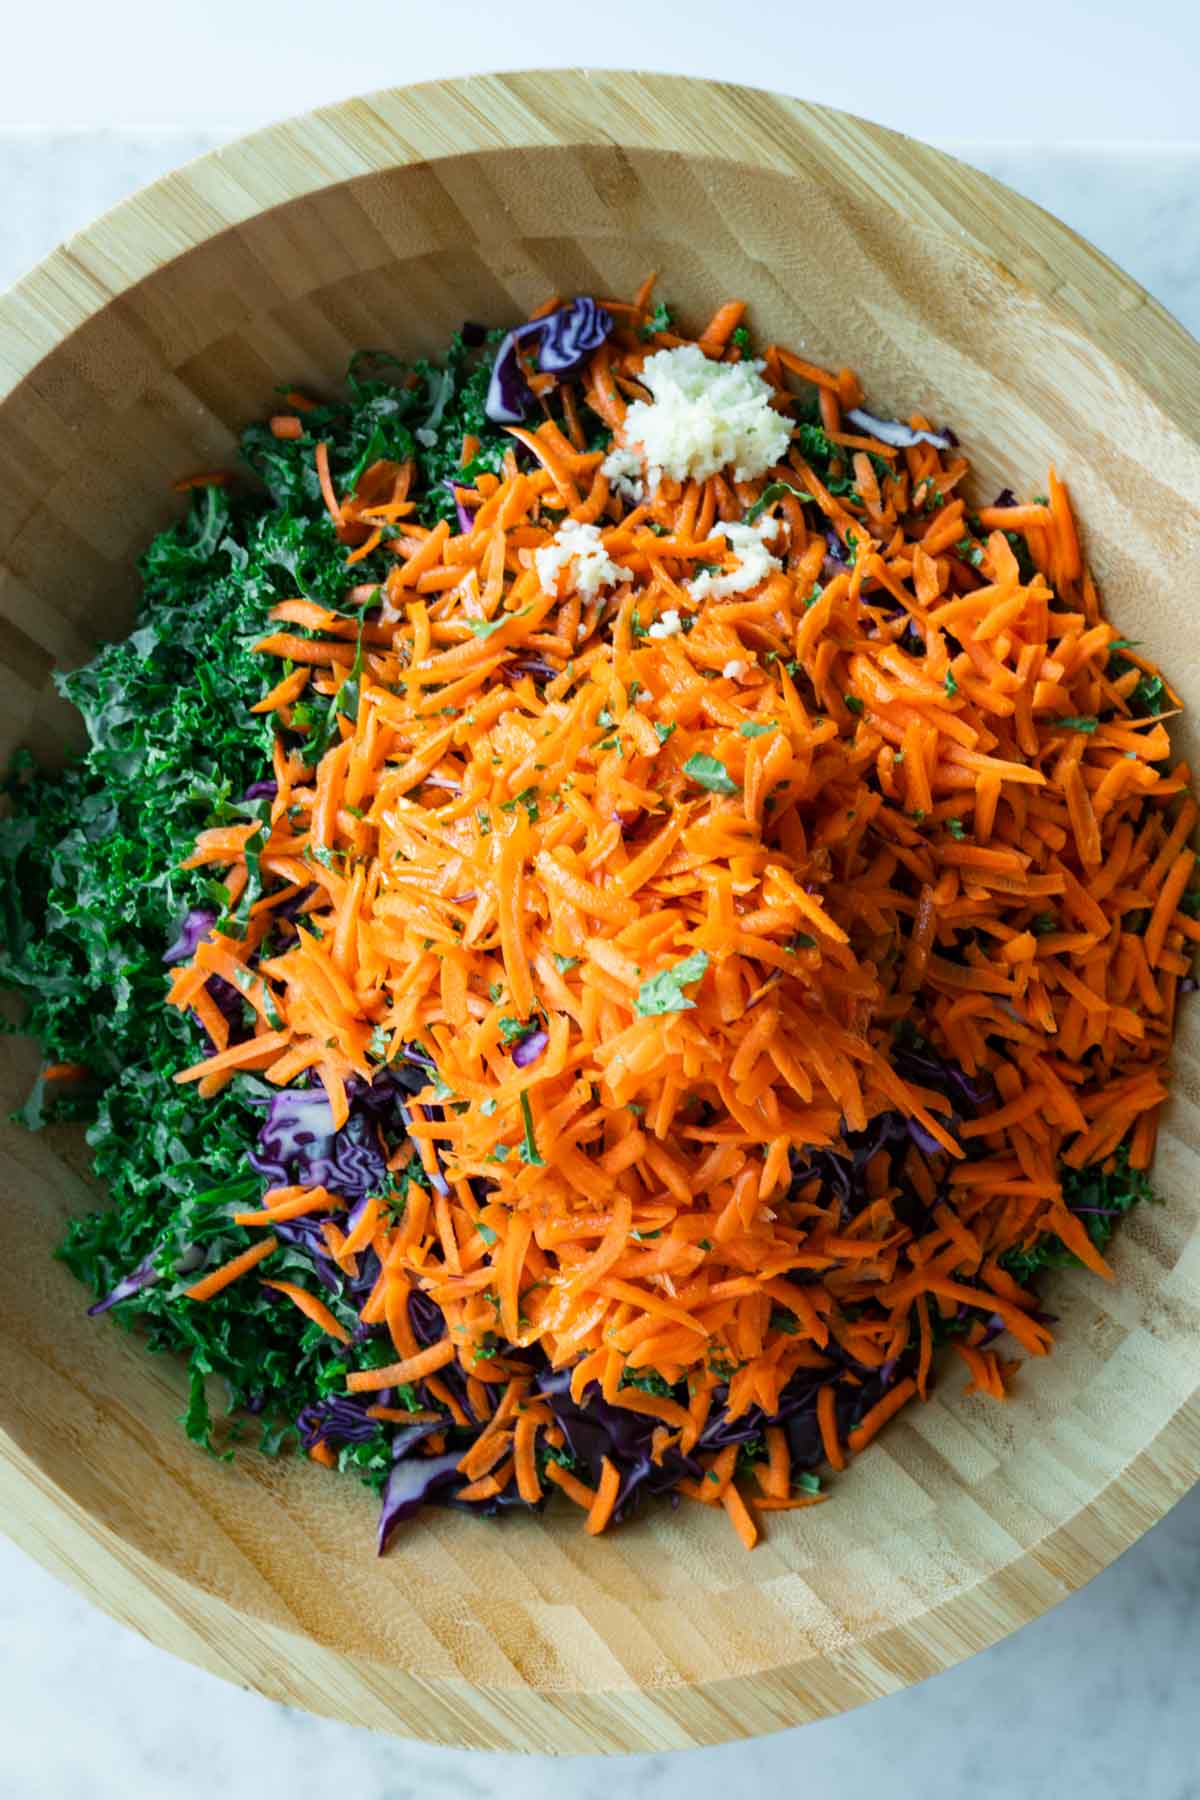 Sliced red cabbage, kale, shredded carrots, and finely pressed garlic in a large wooden bowl.